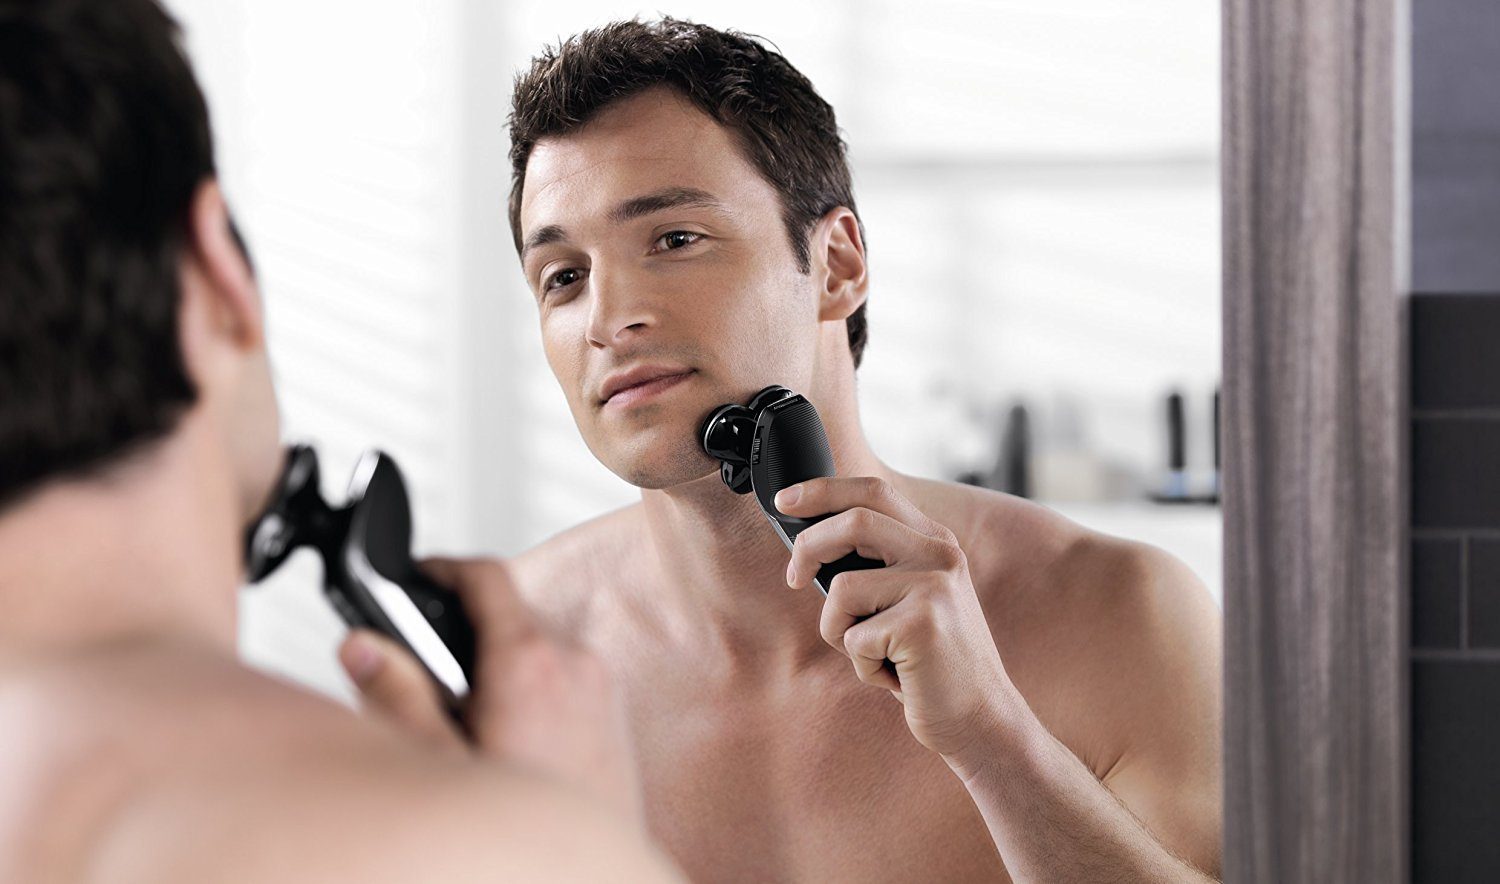 5 Undeniable Benefits of Using an Electric Shaver